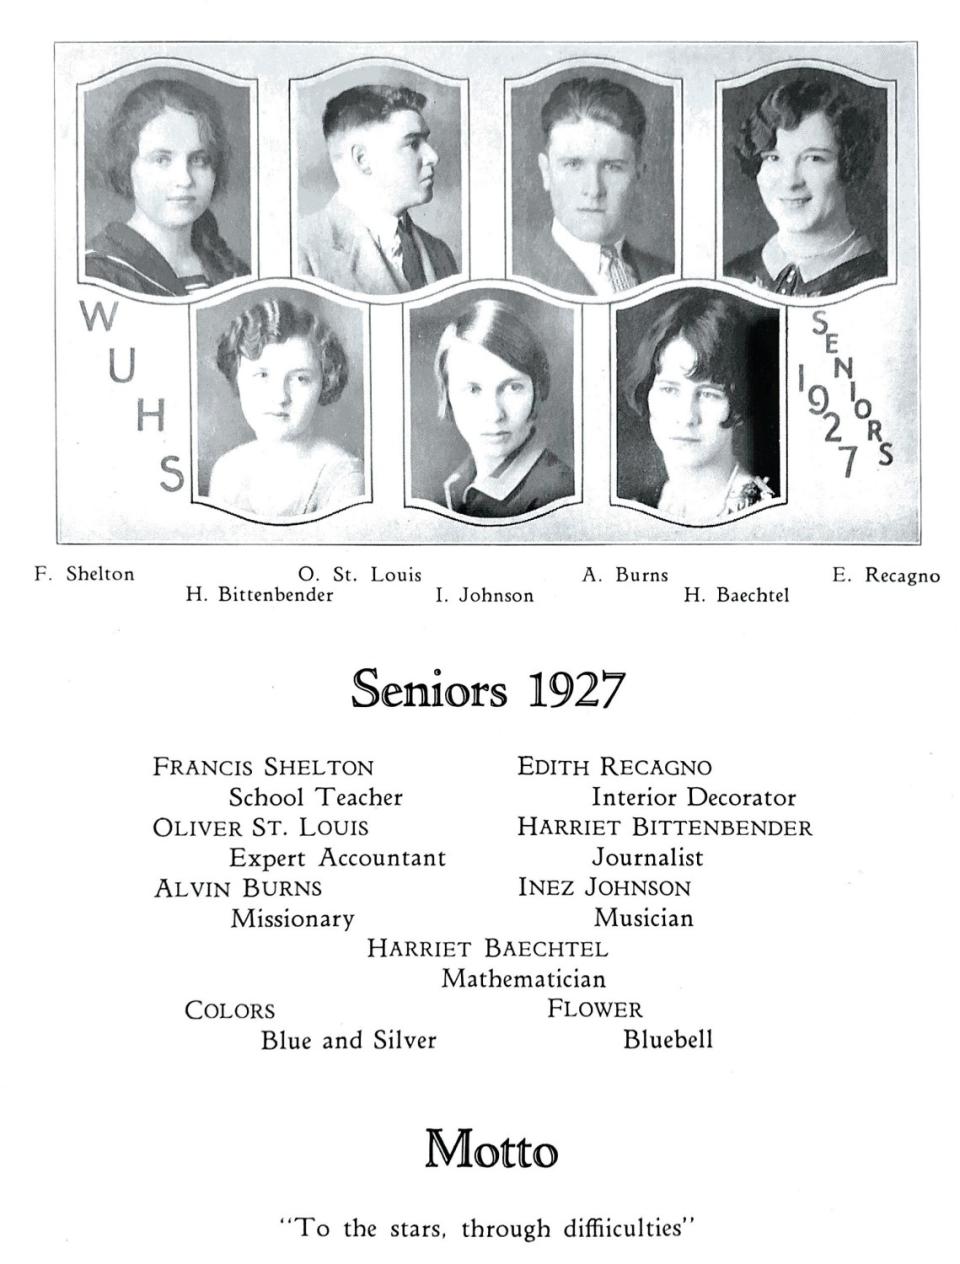 Headshots, including Edie Ceccarelli's, from a senior yearbook.